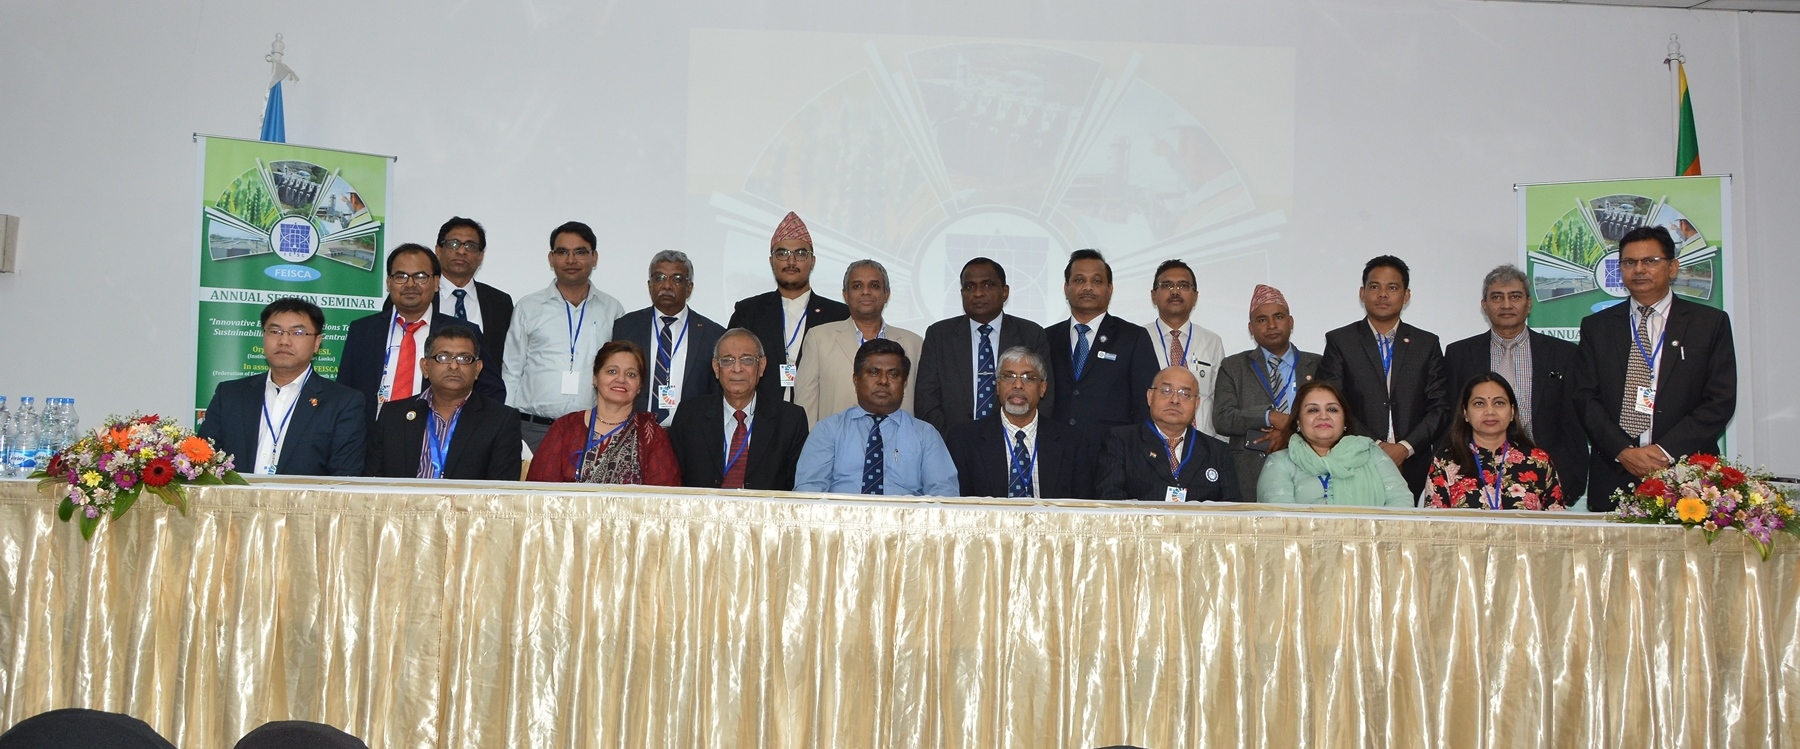 FEISCA - ANNUAL SESSION SEMINAR - COLOMBO